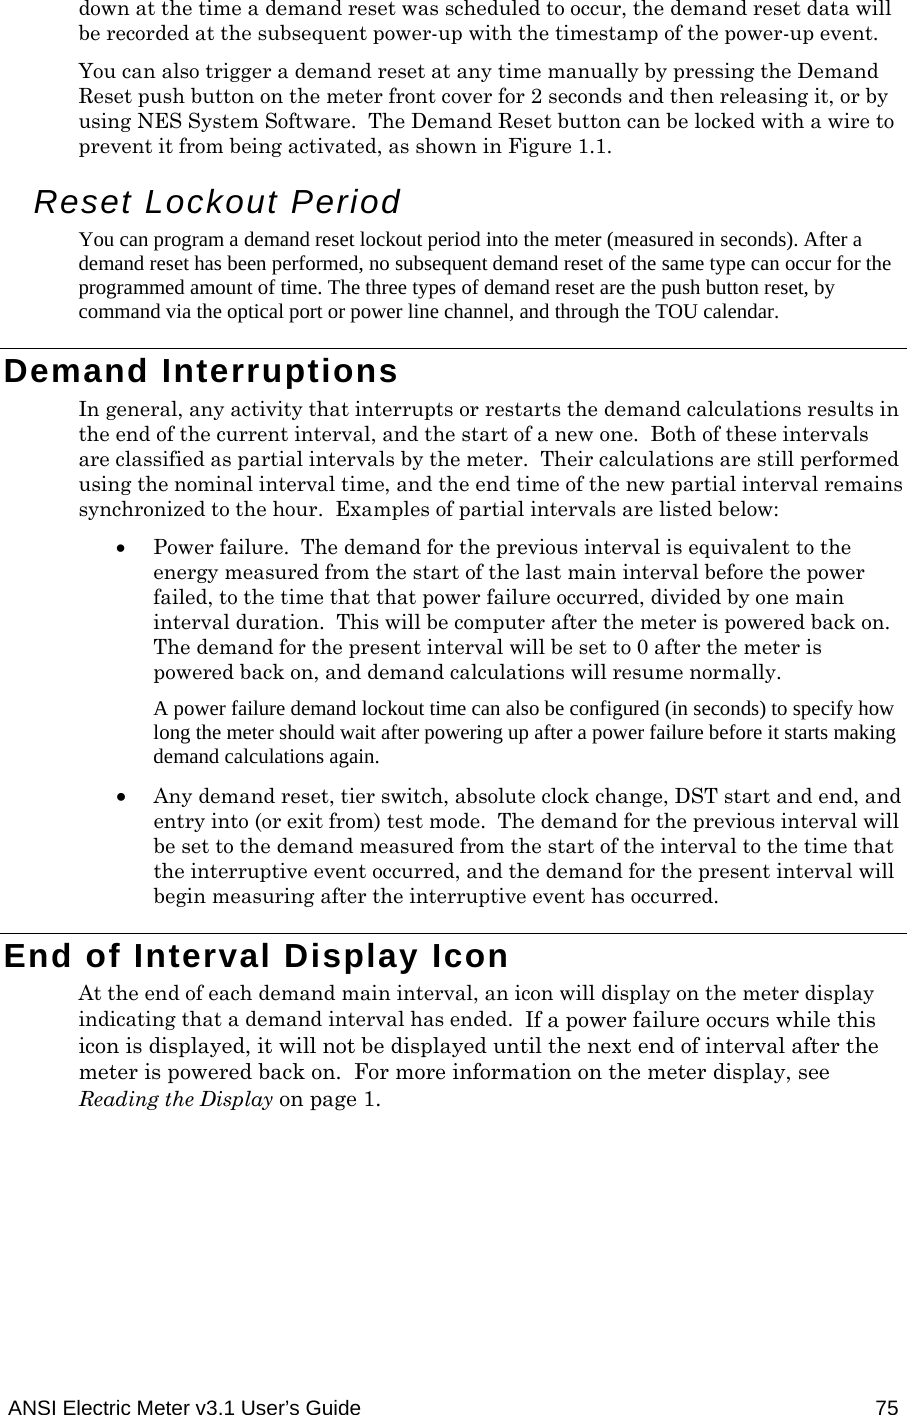  ANSI Electric Meter v3.1 User’s Guide  75 down at the time a demand reset was scheduled to occur, the demand reset data will be recorded at the subsequent power-up with the timestamp of the power-up event. You can also trigger a demand reset at any time manually by pressing the Demand Reset push button on the meter front cover for 2 seconds and then releasing it, or by using NES System Software.  The Demand Reset button can be locked with a wire to prevent it from being activated, as shown in Figure 1.1. Reset Lockout Period You can program a demand reset lockout period into the meter (measured in seconds). After a demand reset has been performed, no subsequent demand reset of the same type can occur for the programmed amount of time. The three types of demand reset are the push button reset, by command via the optical port or power line channel, and through the TOU calendar. Demand Interruptions In general, any activity that interrupts or restarts the demand calculations results in the end of the current interval, and the start of a new one.  Both of these intervals are classified as partial intervals by the meter.  Their calculations are still performed using the nominal interval time, and the end time of the new partial interval remains synchronized to the hour.  Examples of partial intervals are listed below:  Power failure.  The demand for the previous interval is equivalent to the energy measured from the start of the last main interval before the power failed, to the time that that power failure occurred, divided by one main interval duration.  This will be computer after the meter is powered back on.  The demand for the present interval will be set to 0 after the meter is powered back on, and demand calculations will resume normally. A power failure demand lockout time can also be configured (in seconds) to specify how long the meter should wait after powering up after a power failure before it starts making demand calculations again.  Any demand reset, tier switch, absolute clock change, DST start and end, and entry into (or exit from) test mode.  The demand for the previous interval will be set to the demand measured from the start of the interval to the time that the interruptive event occurred, and the demand for the present interval will begin measuring after the interruptive event has occurred. End of Interval Display Icon At the end of each demand main interval, an icon will display on the meter display indicating that a demand interval has ended.  If a power failure occurs while this icon is displayed, it will not be displayed until the next end of interval after the meter is powered back on.  For more information on the meter display, see Reading the Display on page 1.